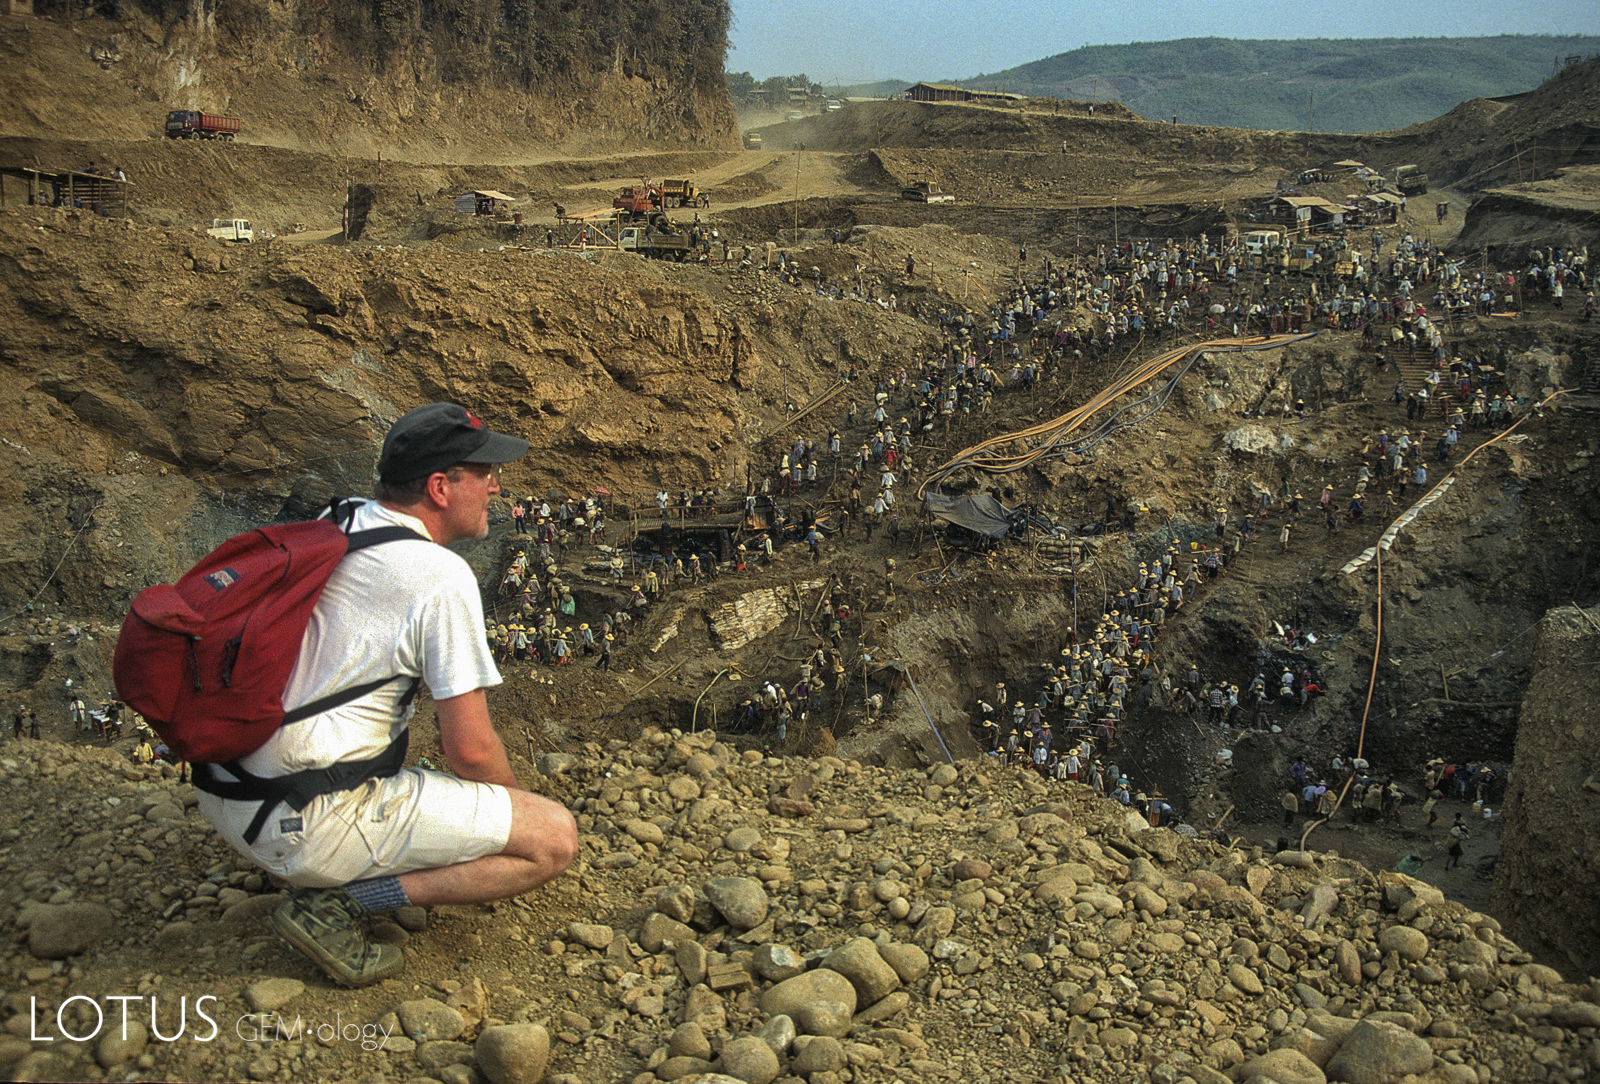 In 1997, I was back for more, this time in the dry season. Crossing a small hill from Hpakan, was a site that still leaves me stunned. Thousands of miners carry rock out of a huge hole. It was one of the most extraordinary sights I've ever seen in my life.